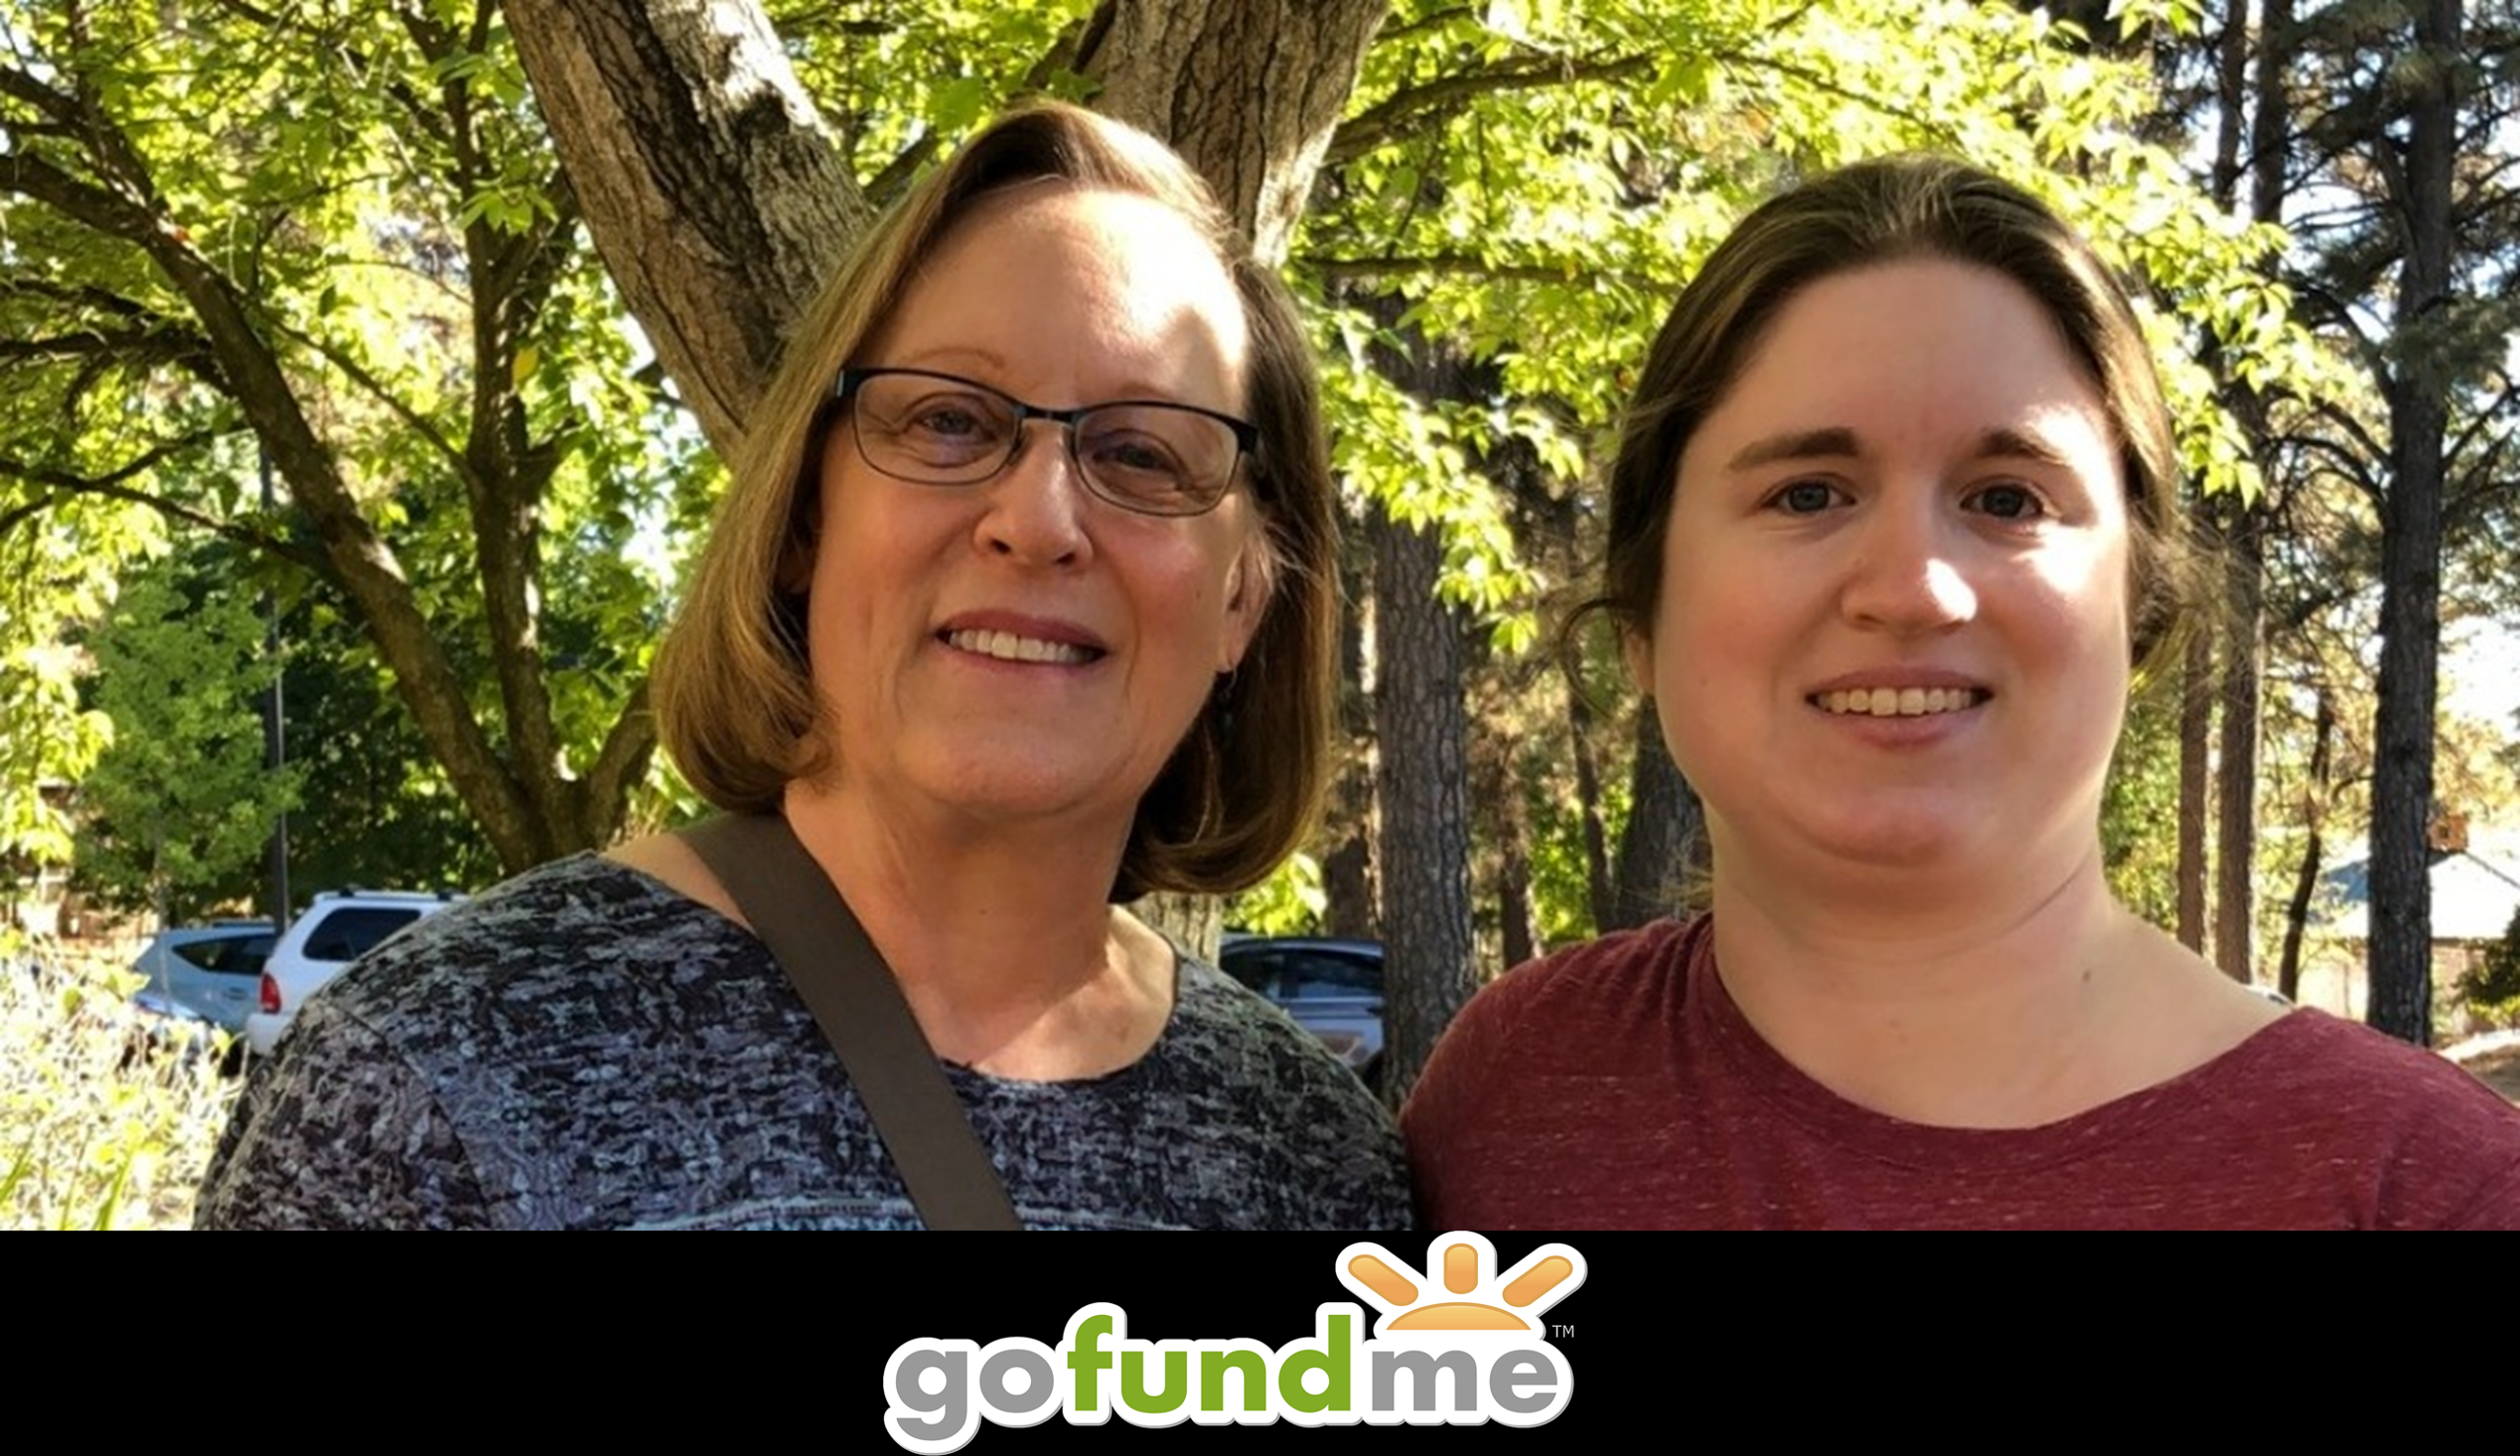 images/colleen-cathy-gofundme.png